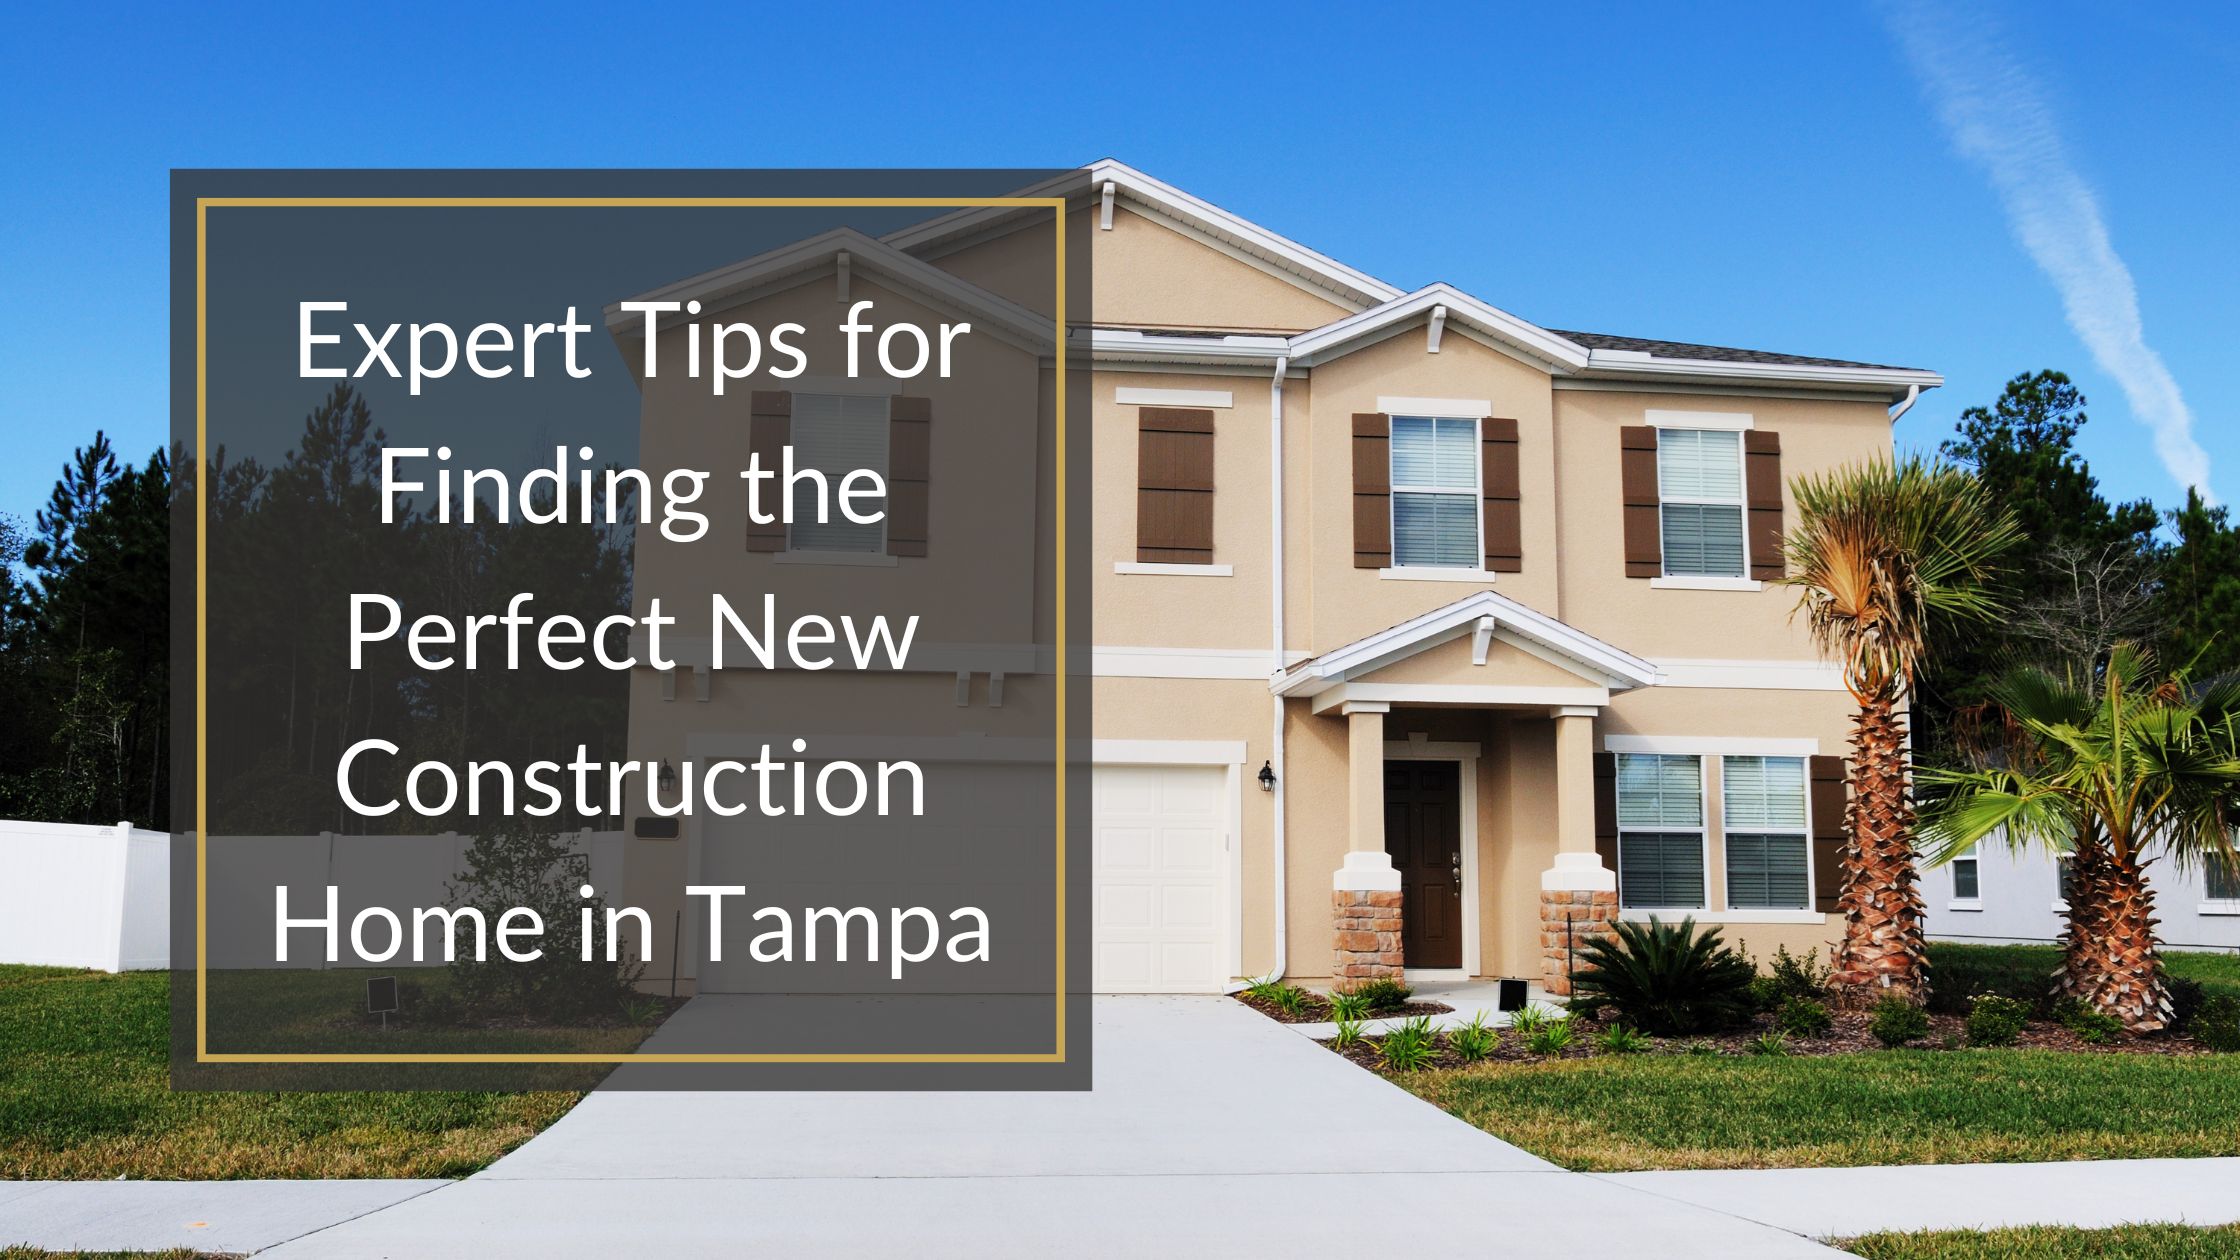 New Construction Home in Tampa